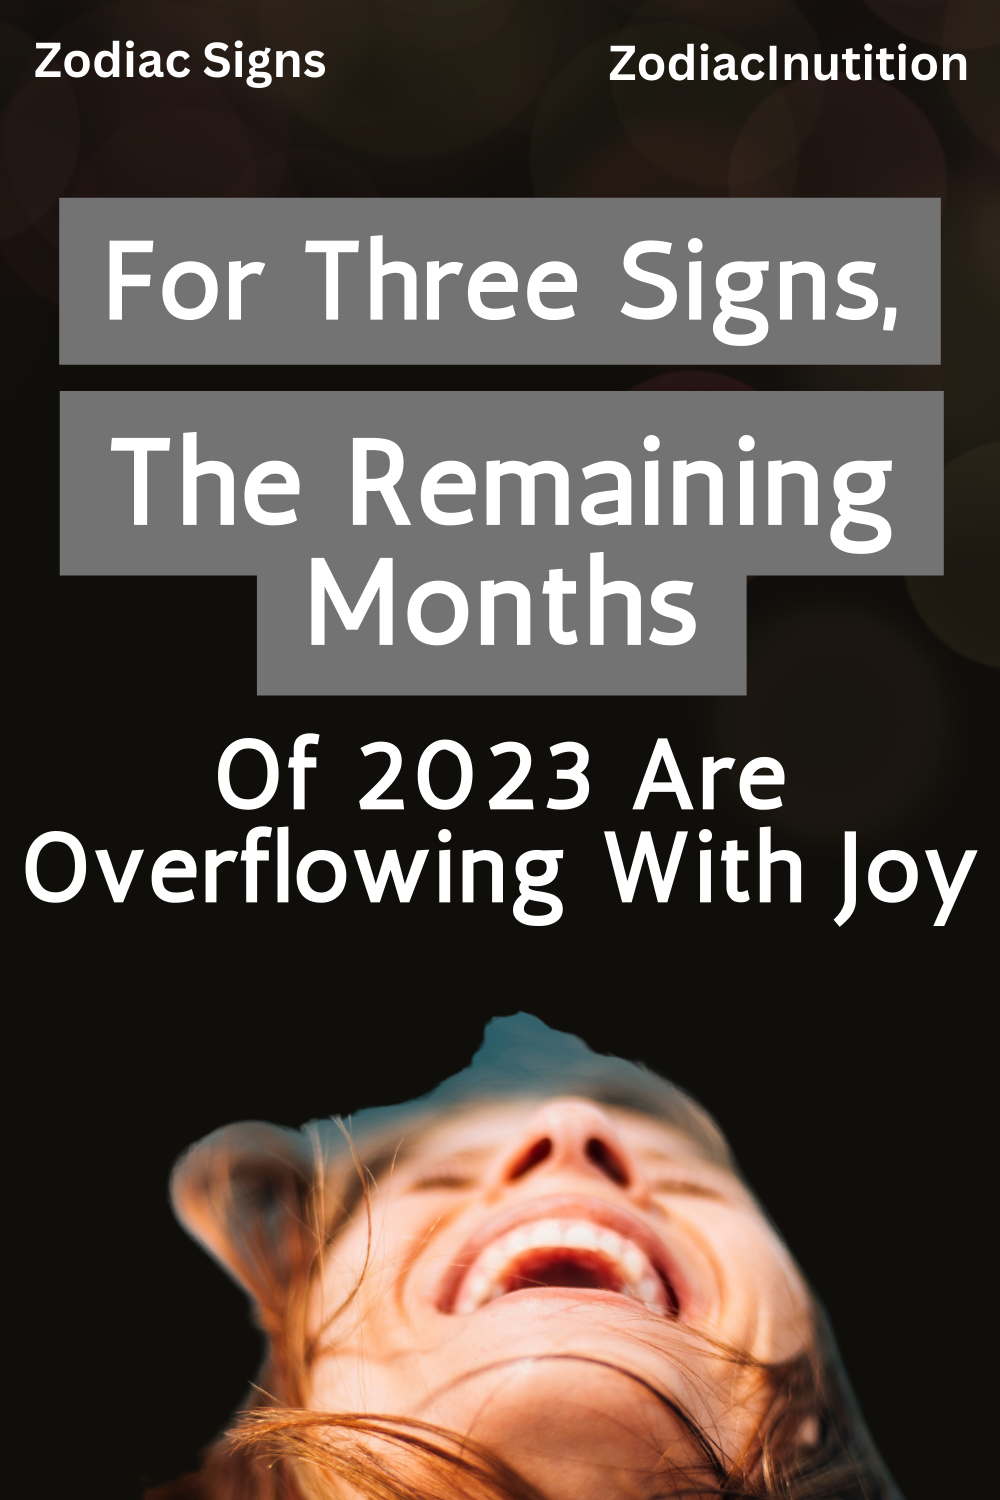 For Three Signs, The Remaining Months Of 2023 Are Overflowing With Joy